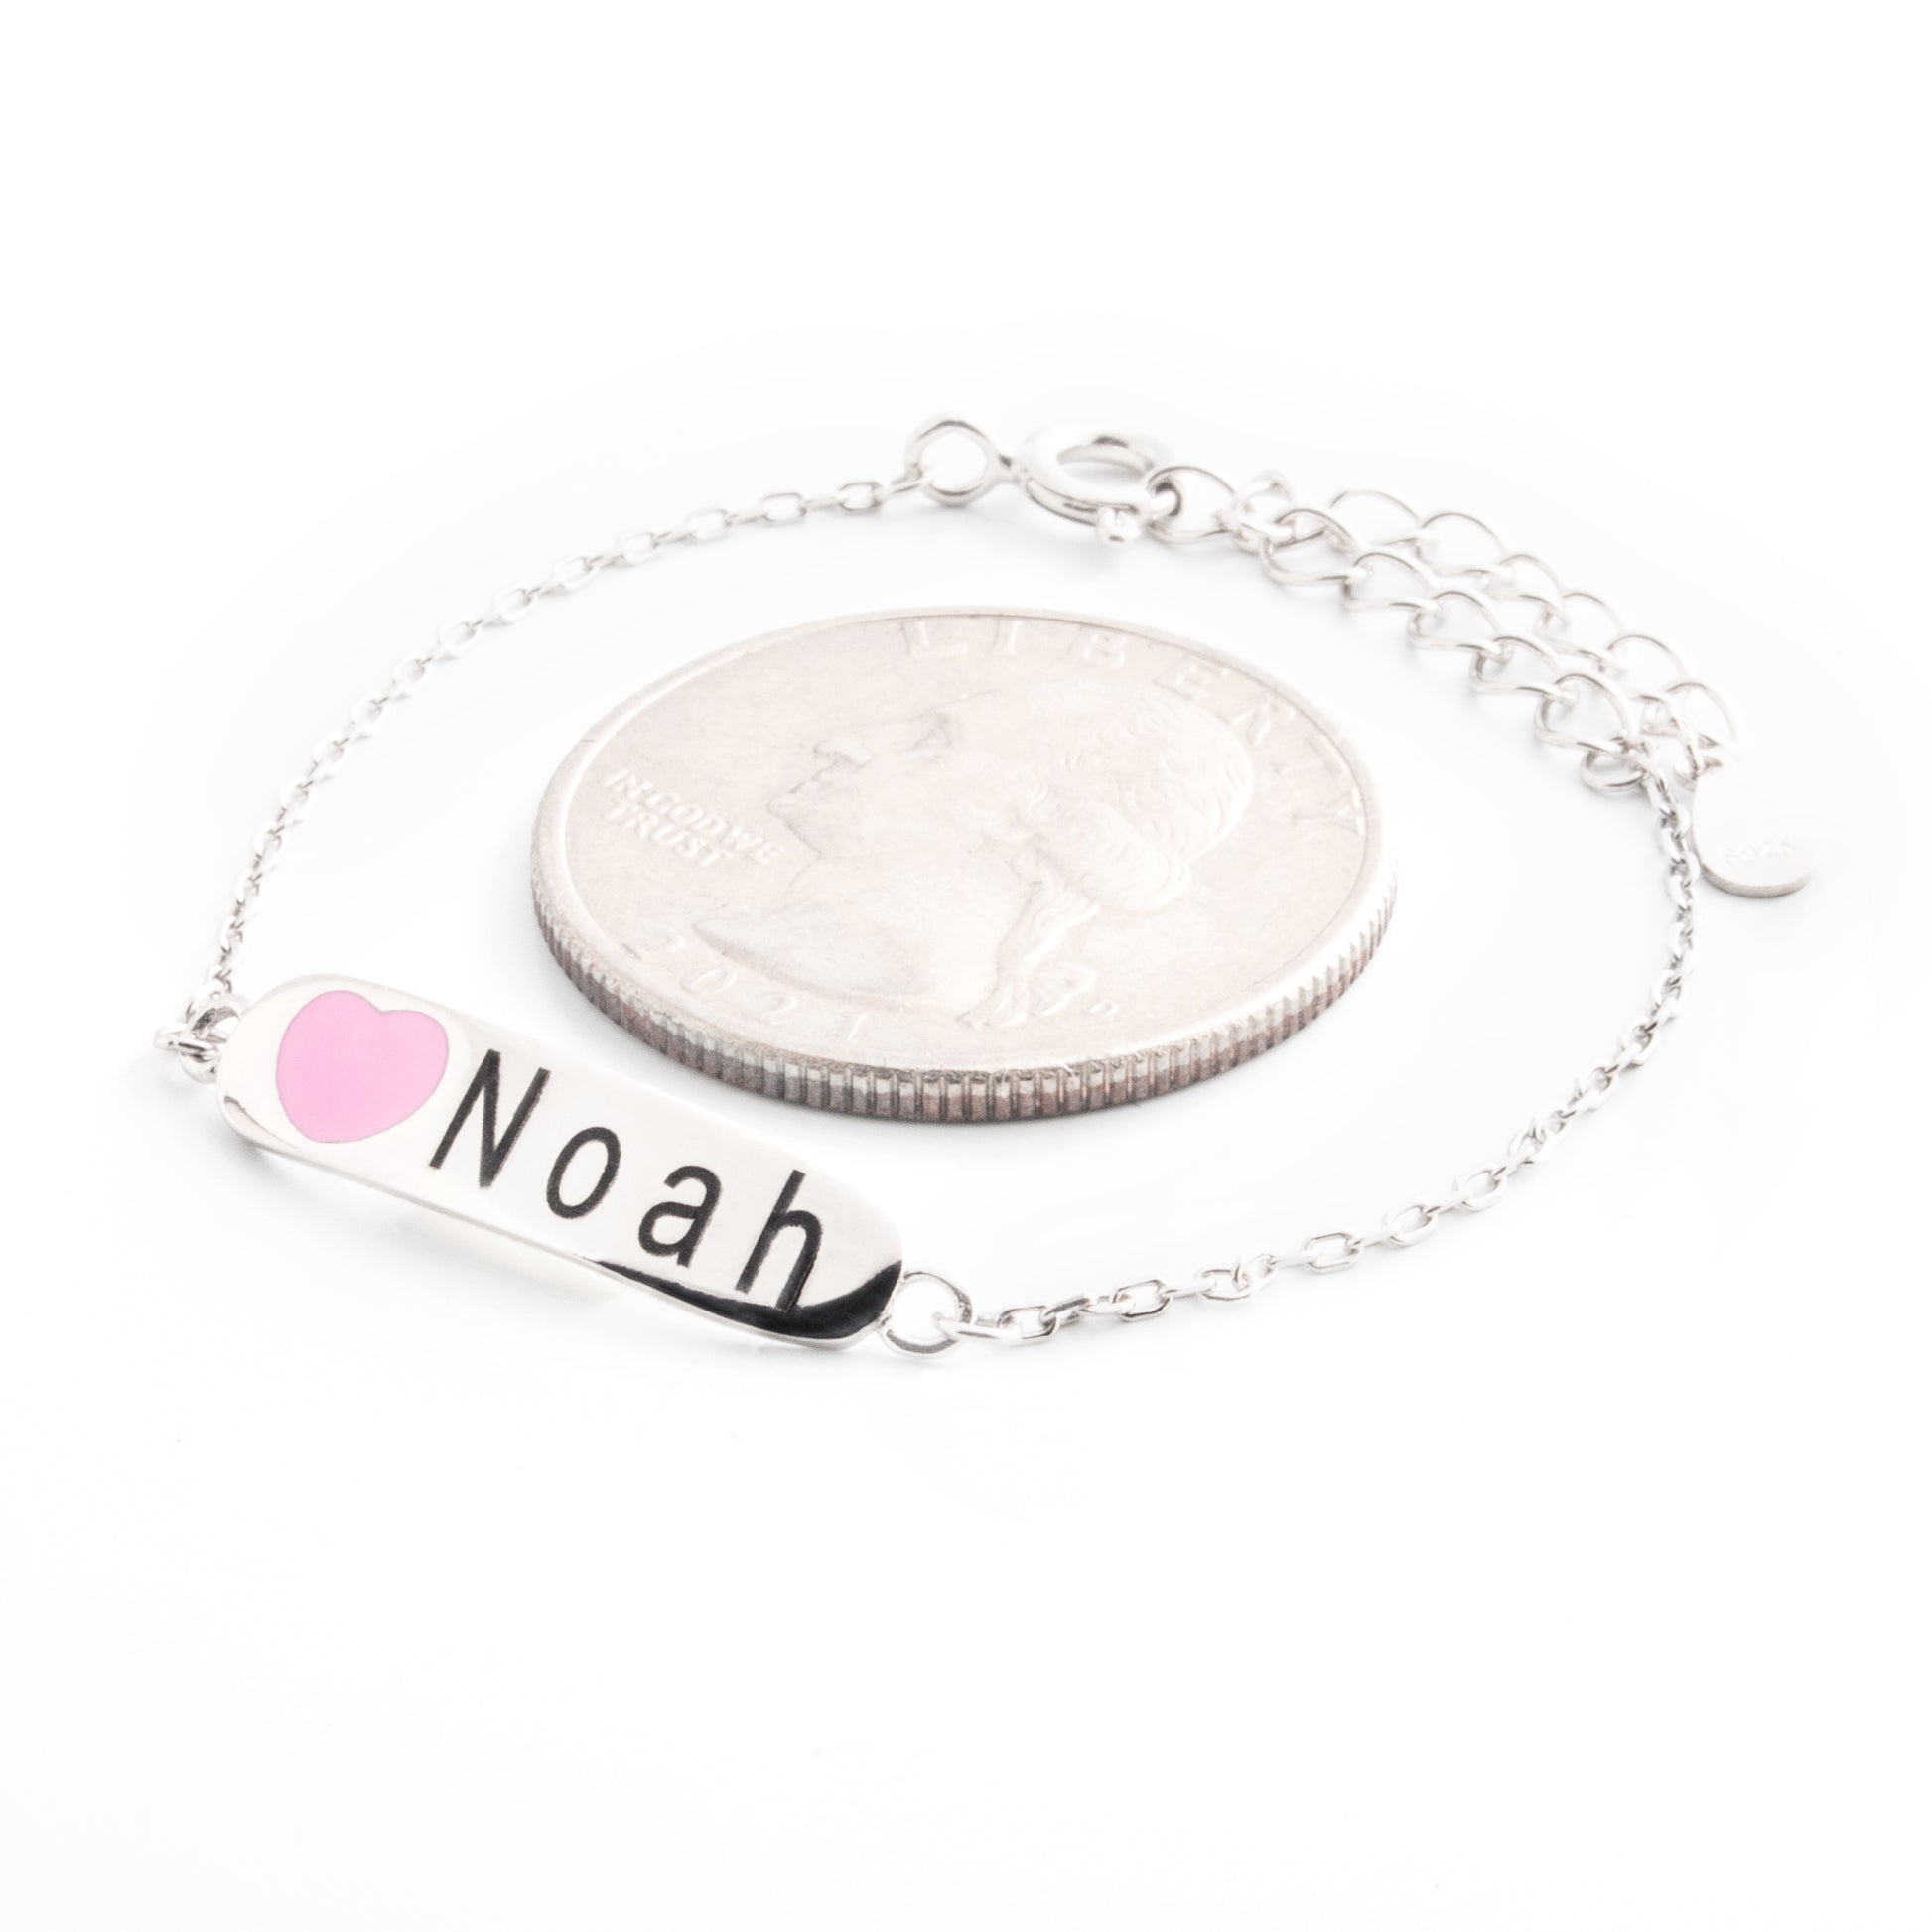 Buy Child's Silver ID Bracelet with Pink Heart at Petite Boutique 